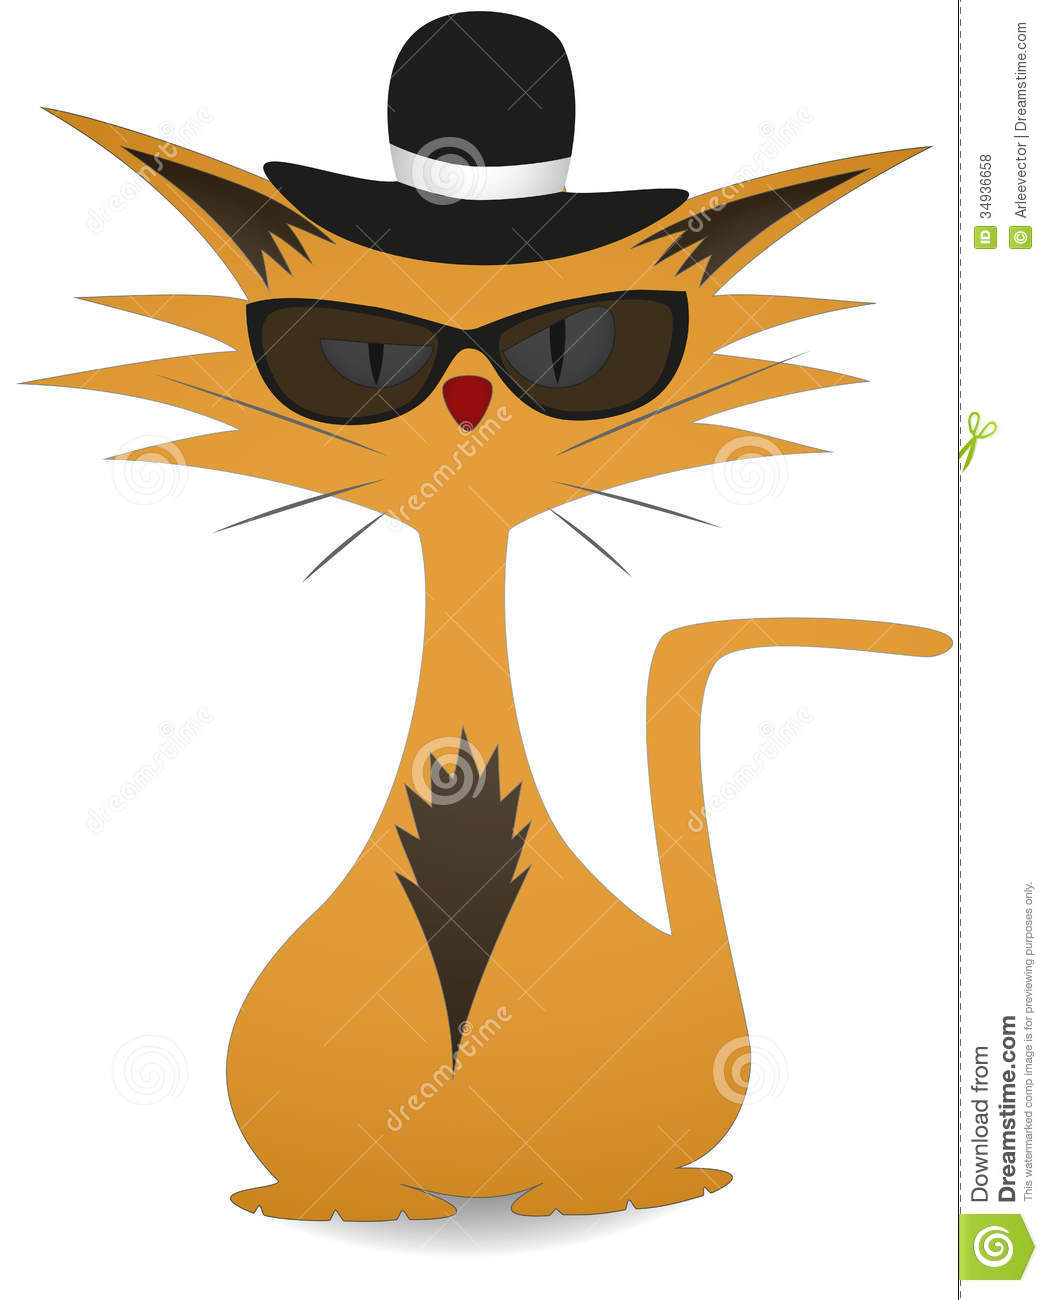 Cool Cat Royalty Free Stock Photos   Image  34936658